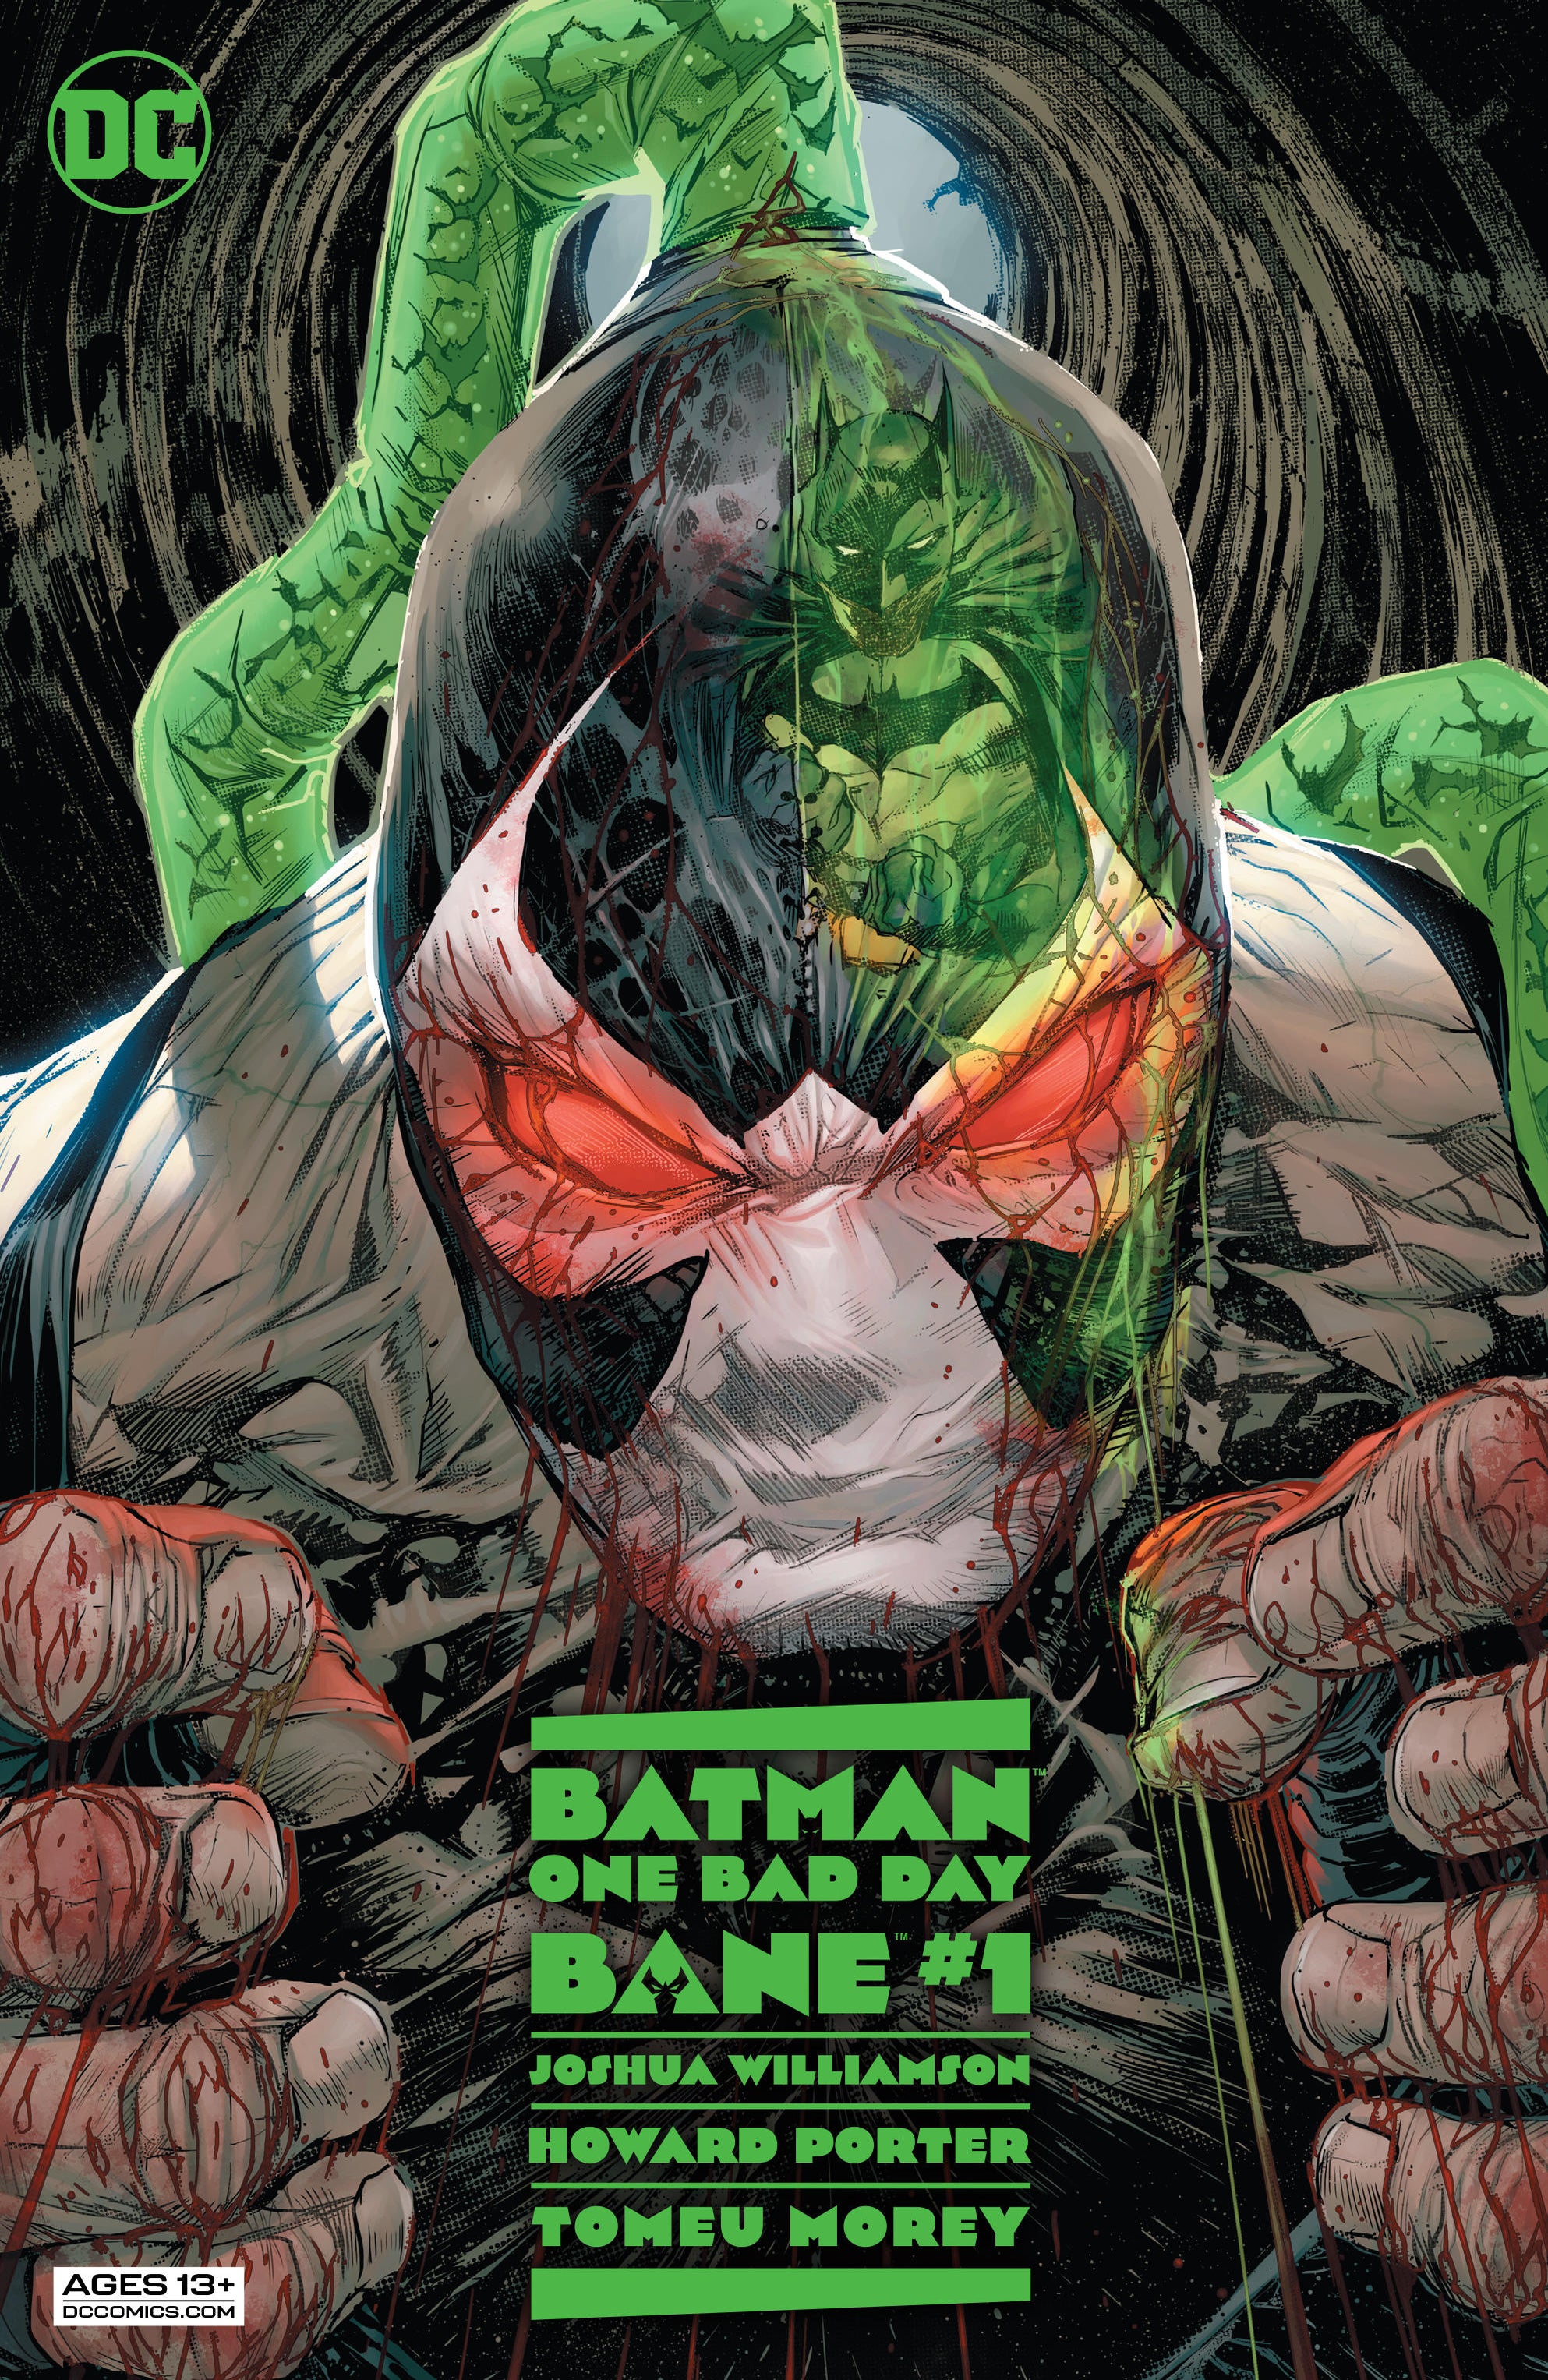 DC Reveals Old Man Bane in New Batman Preview